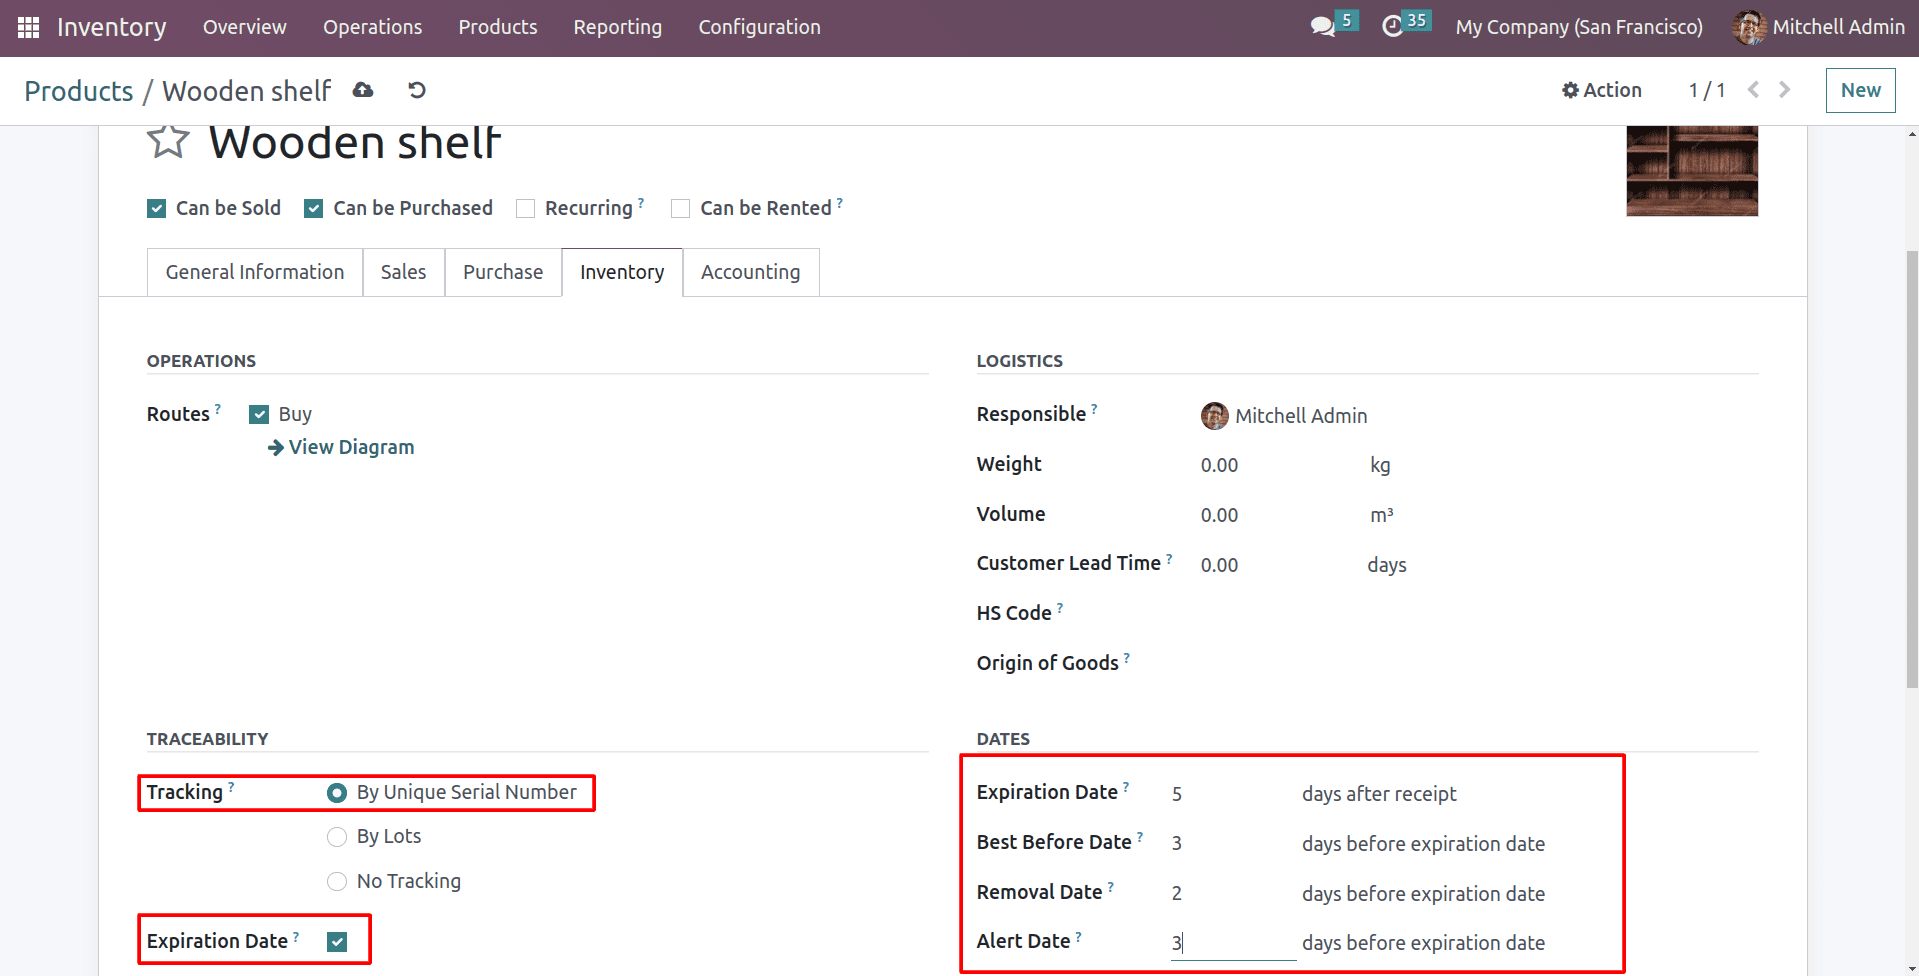 How to Configure Lots/Serial Numbers & Product Traceability in Odoo 16-cybrosys